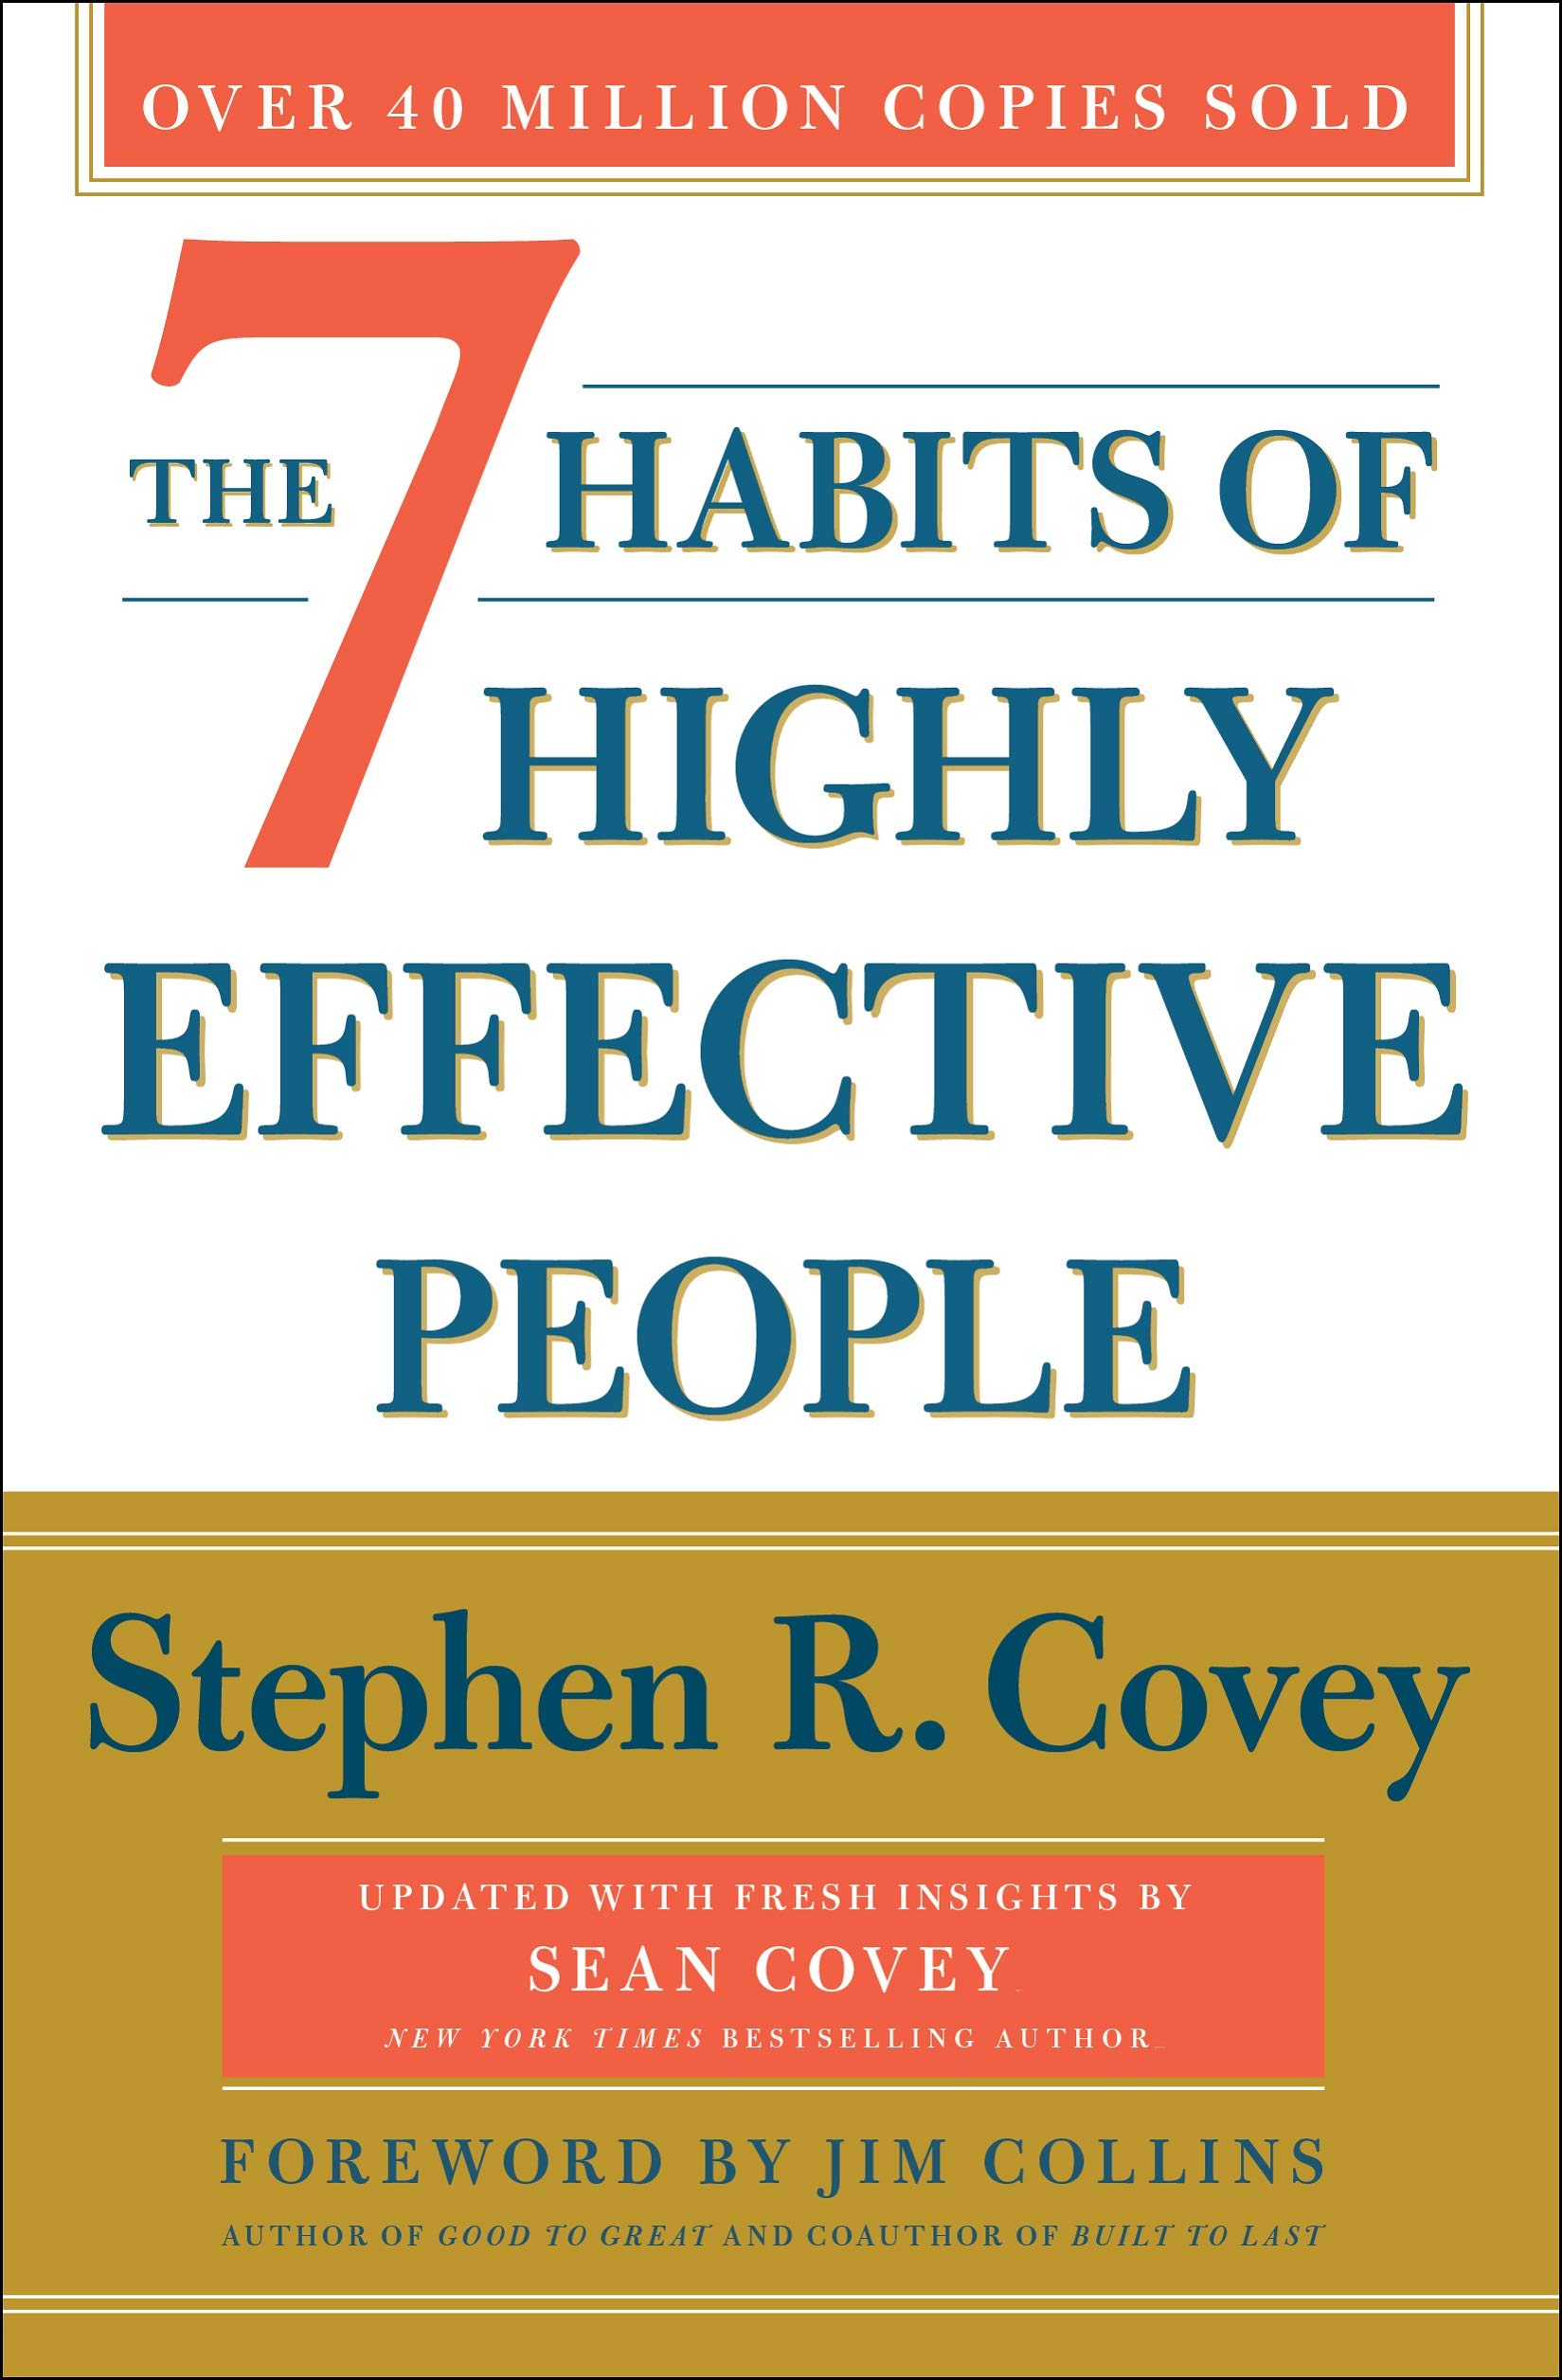 10. 'The 7 Habits of Highly Effective People' by Stephen Covey